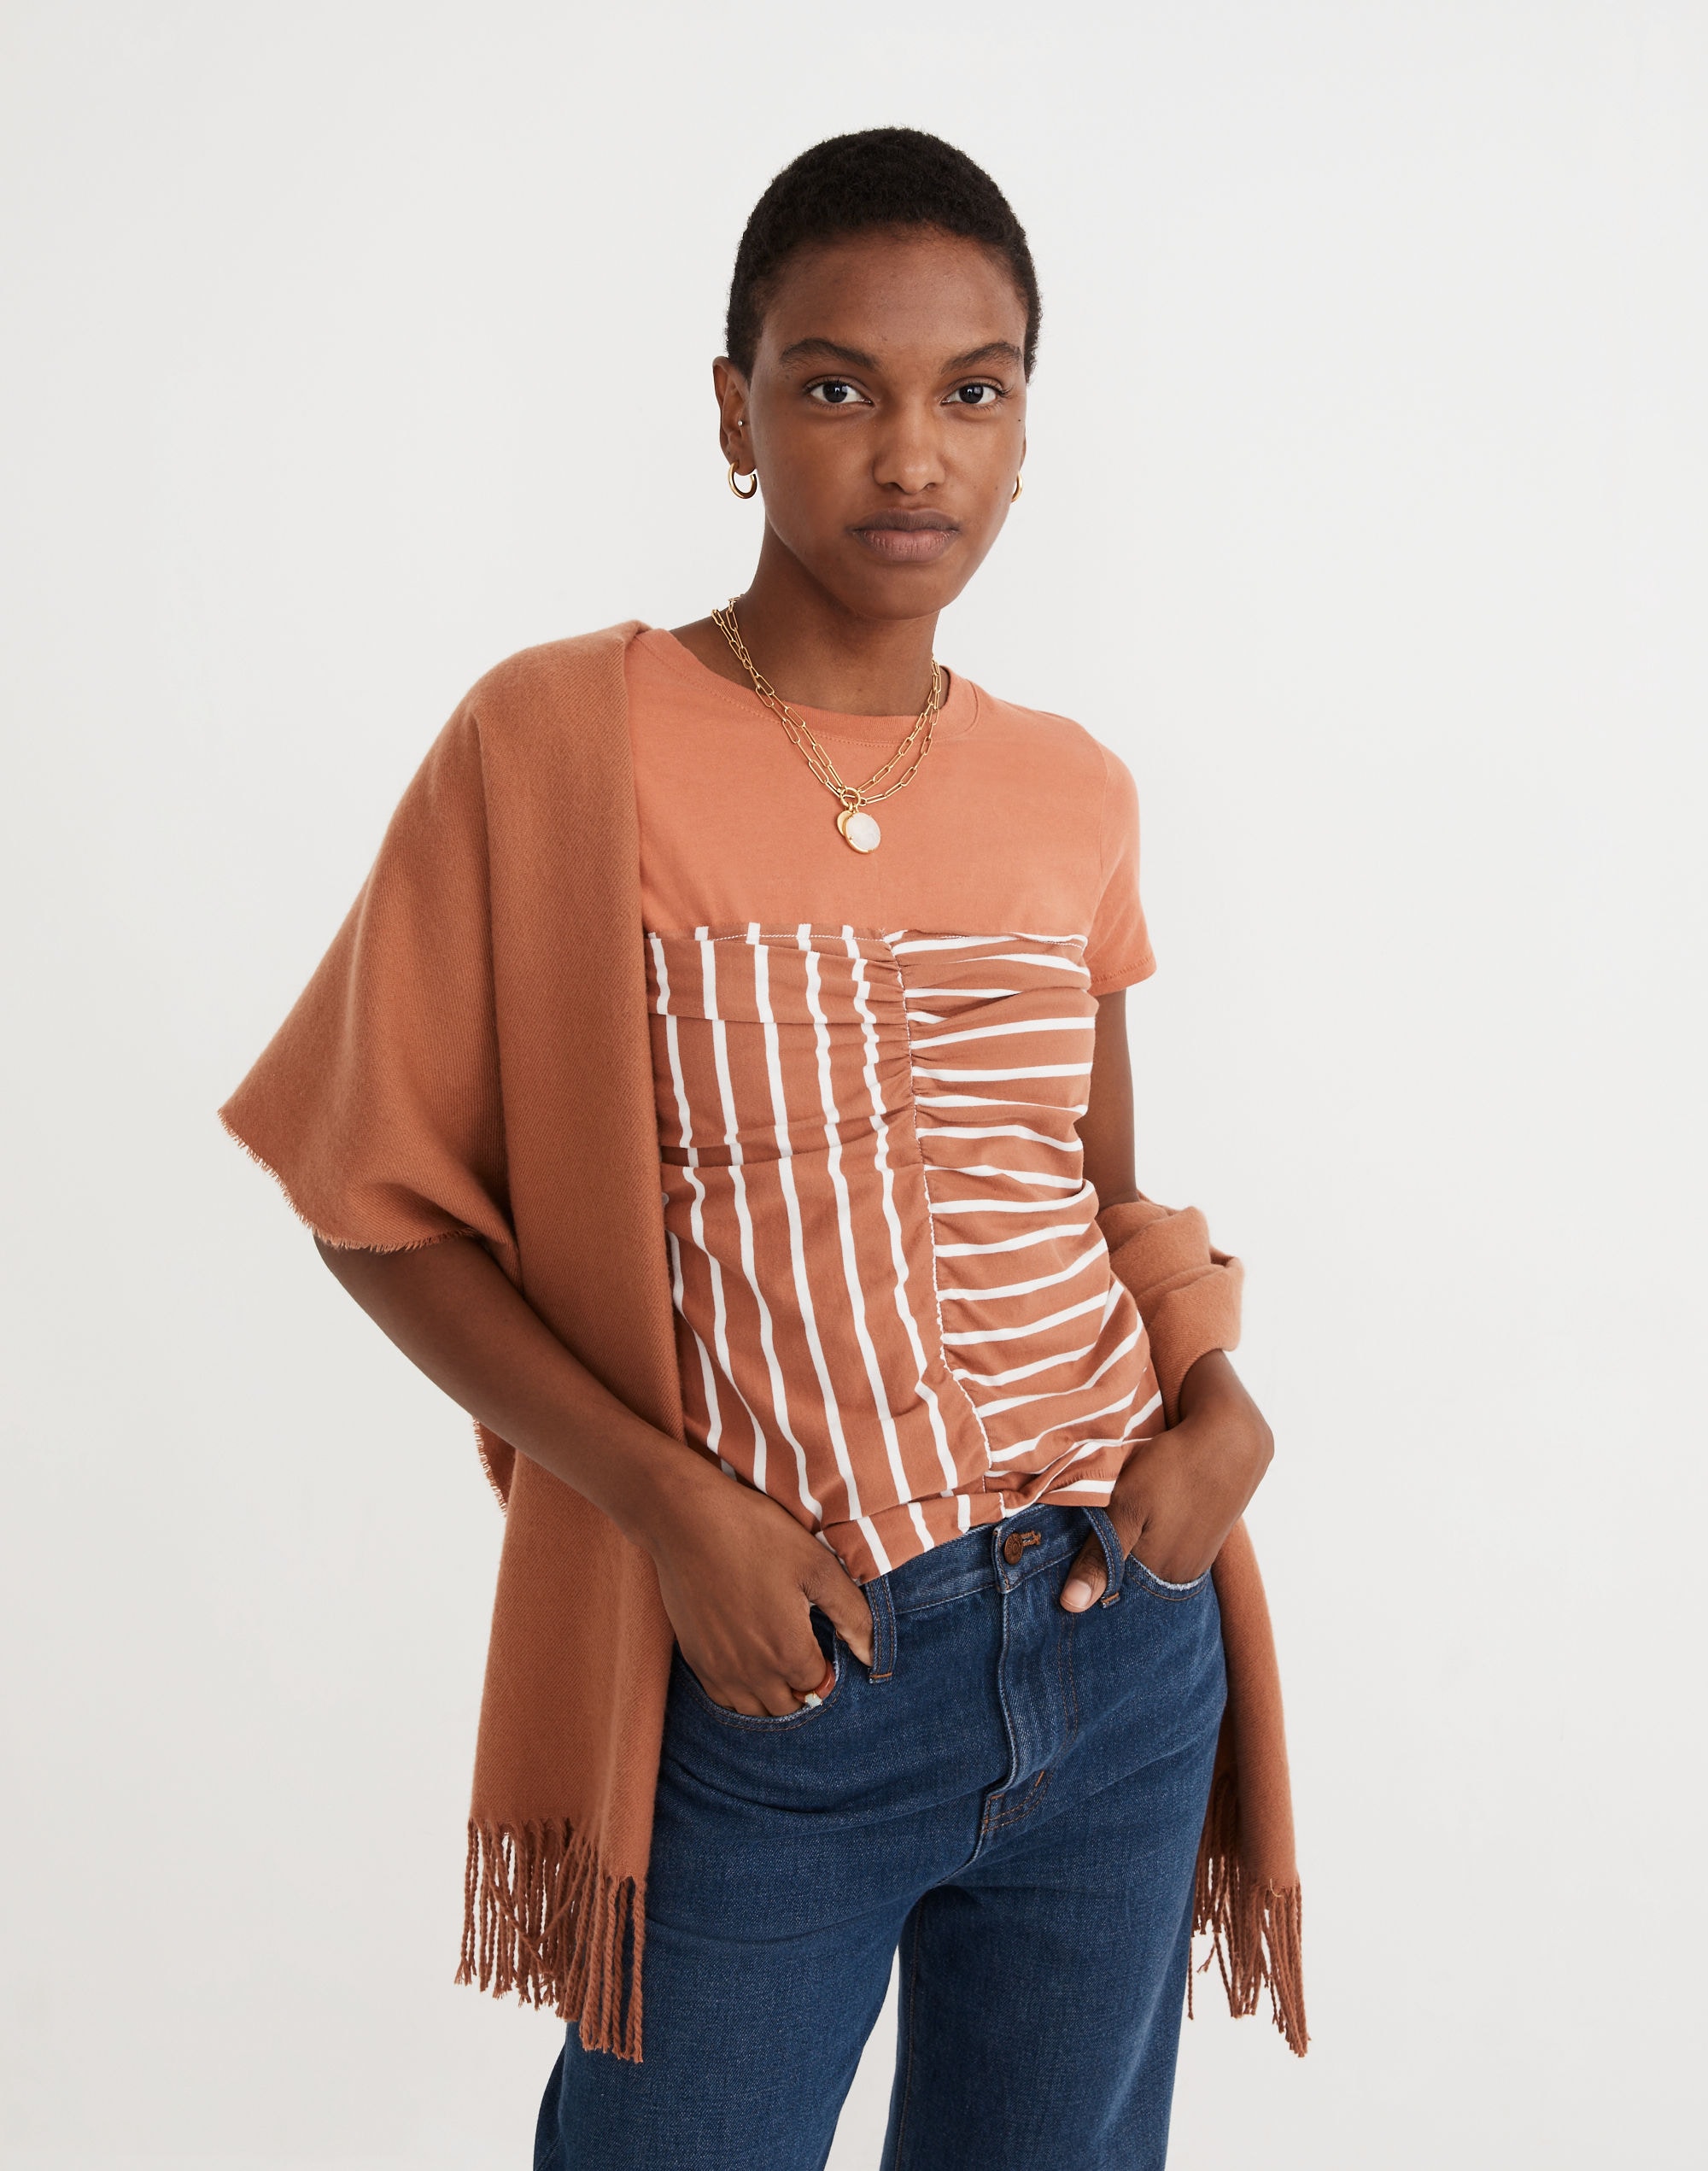 Madewell x Rentrayage Upcycled Ruched Tee